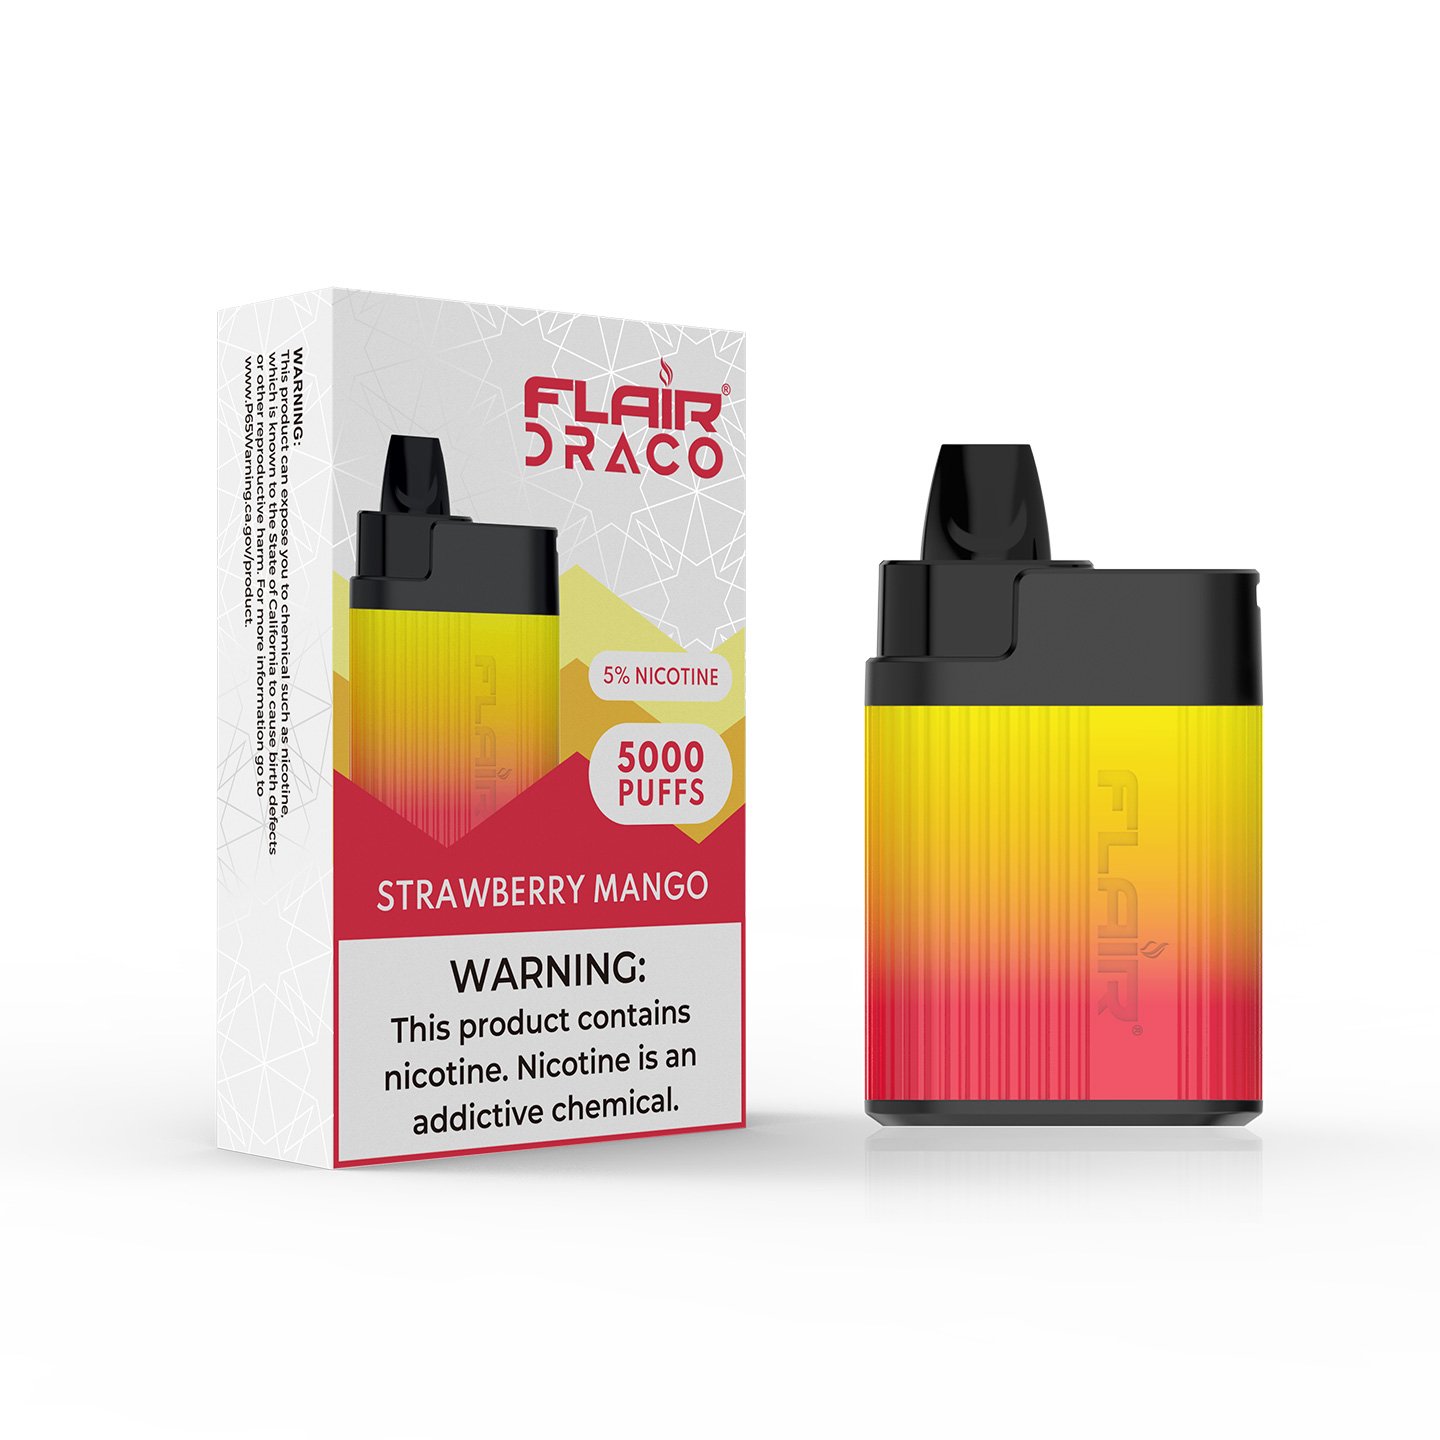 Flair Draco Disposable Device (Strawberry Mango - 5000 Puffs)